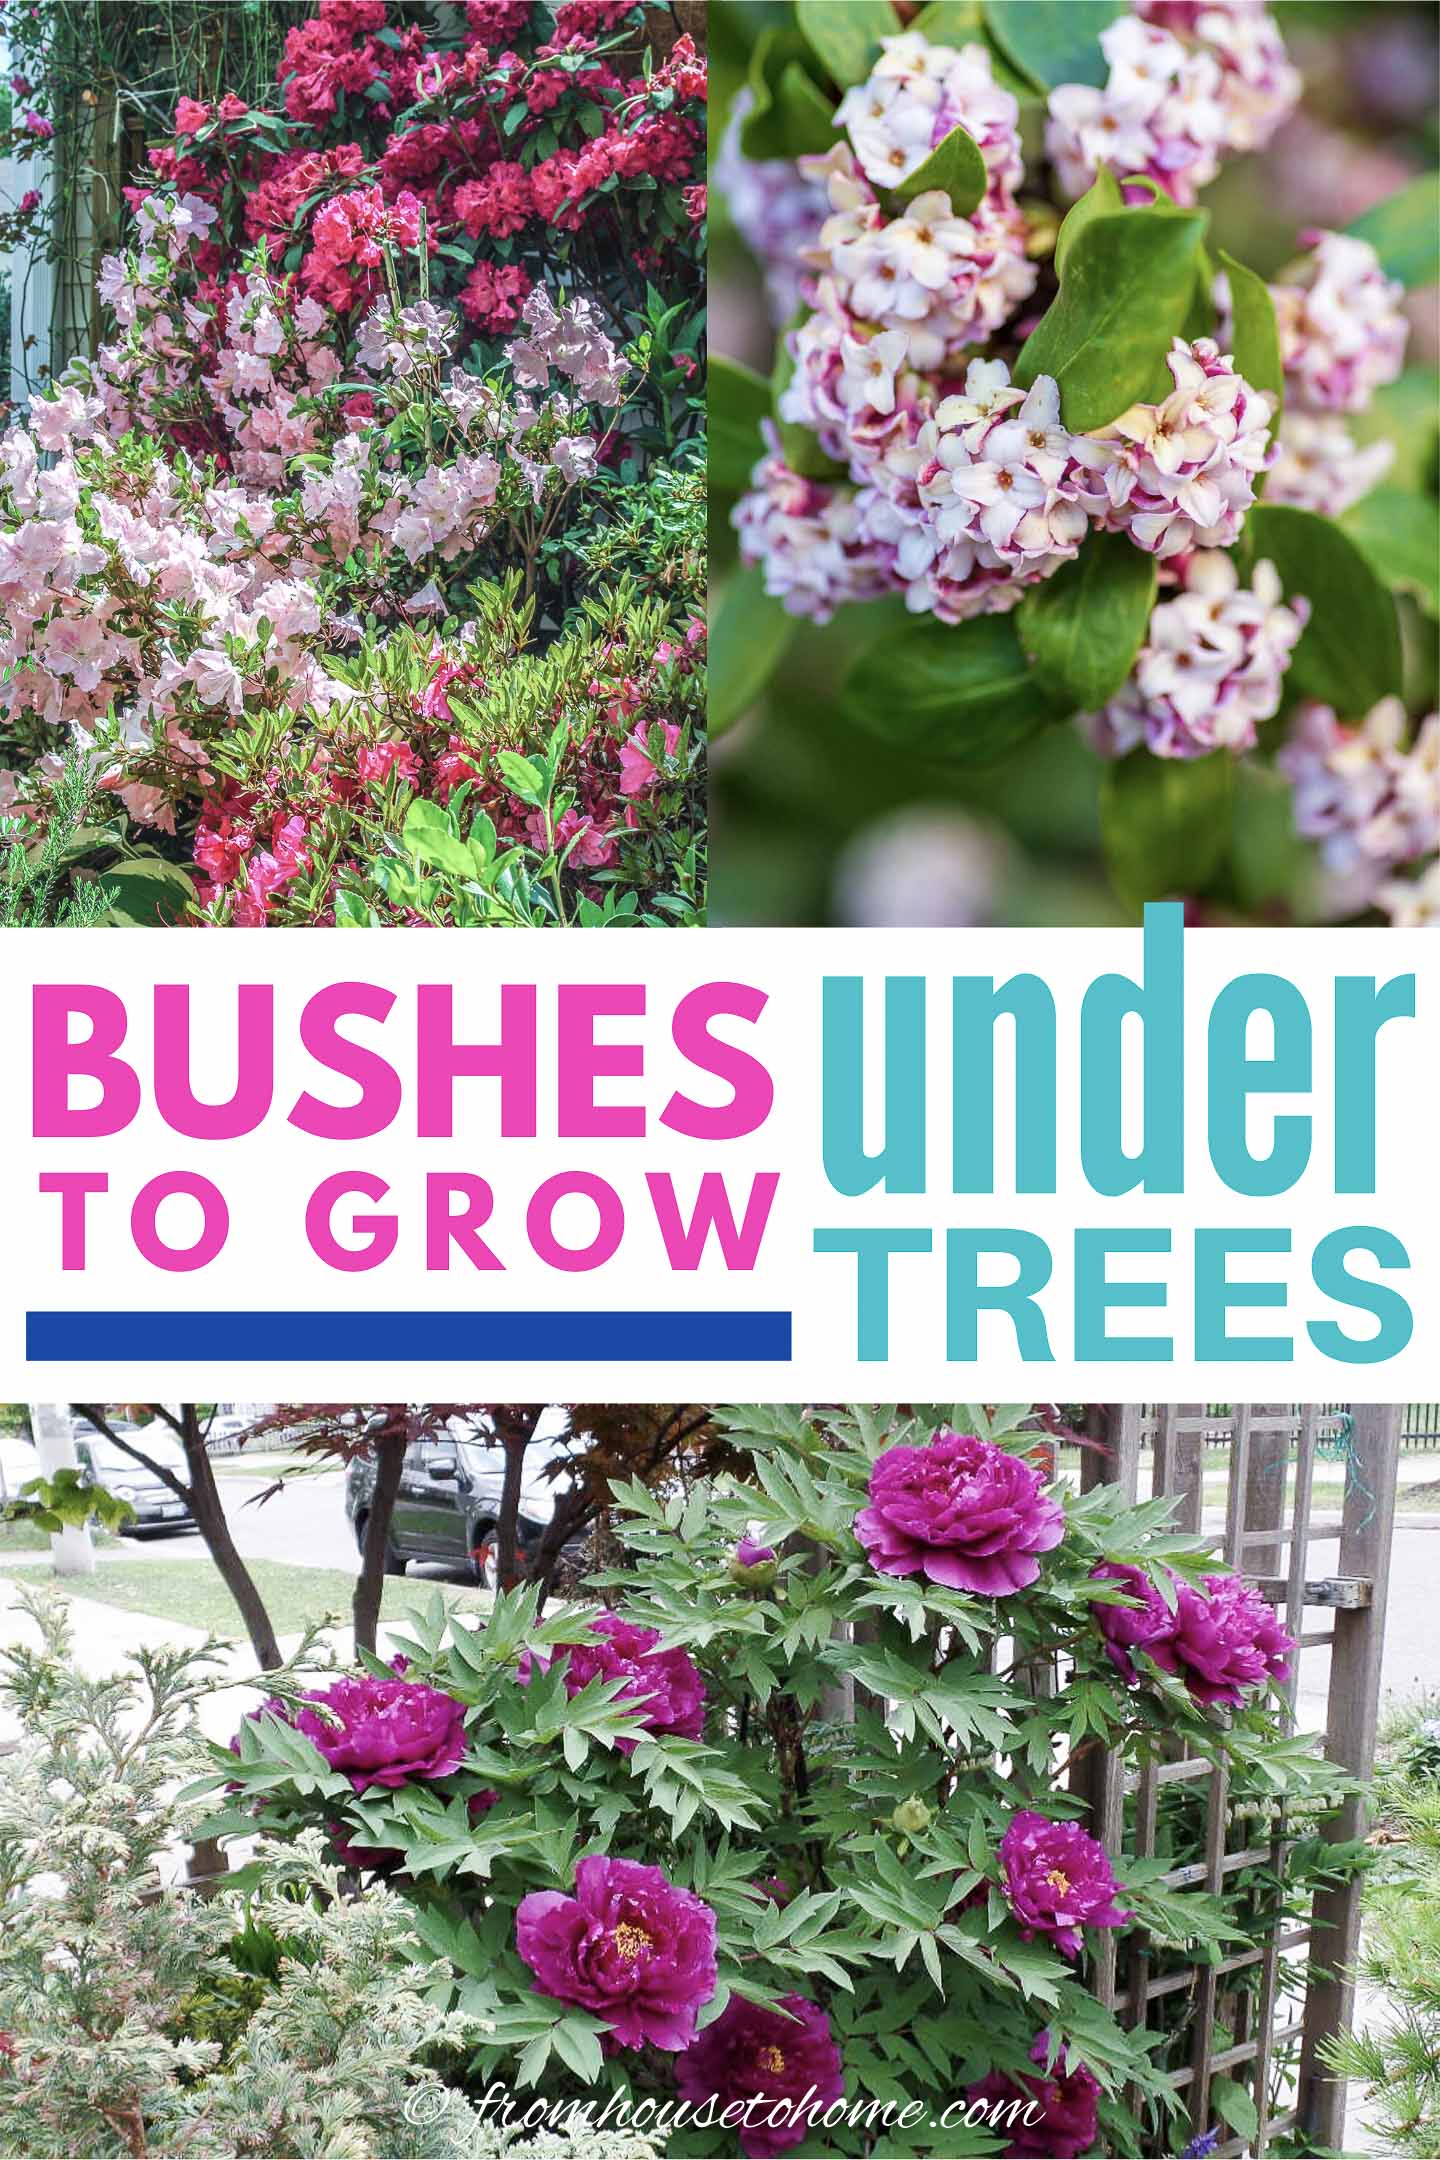 3 pictures of shade shrubs with the text "Bushes to grow under trees" across the middle